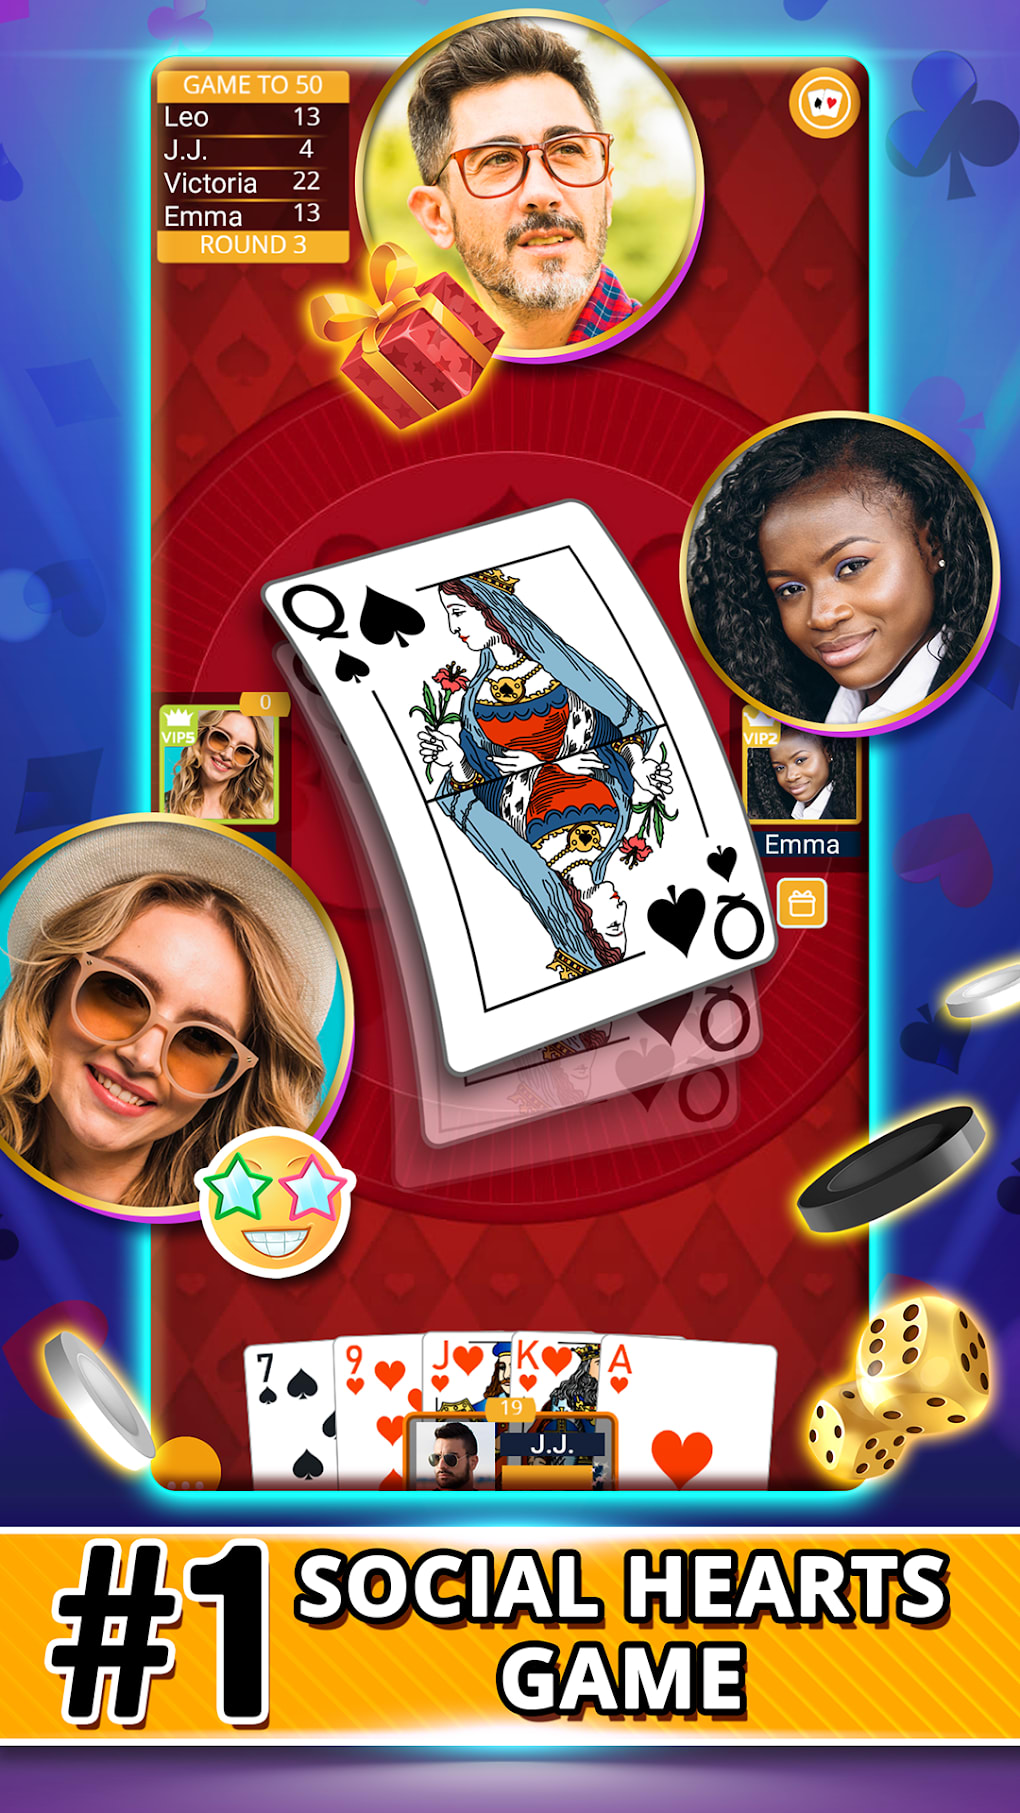 Play Card and Board Games Online - VIP Games